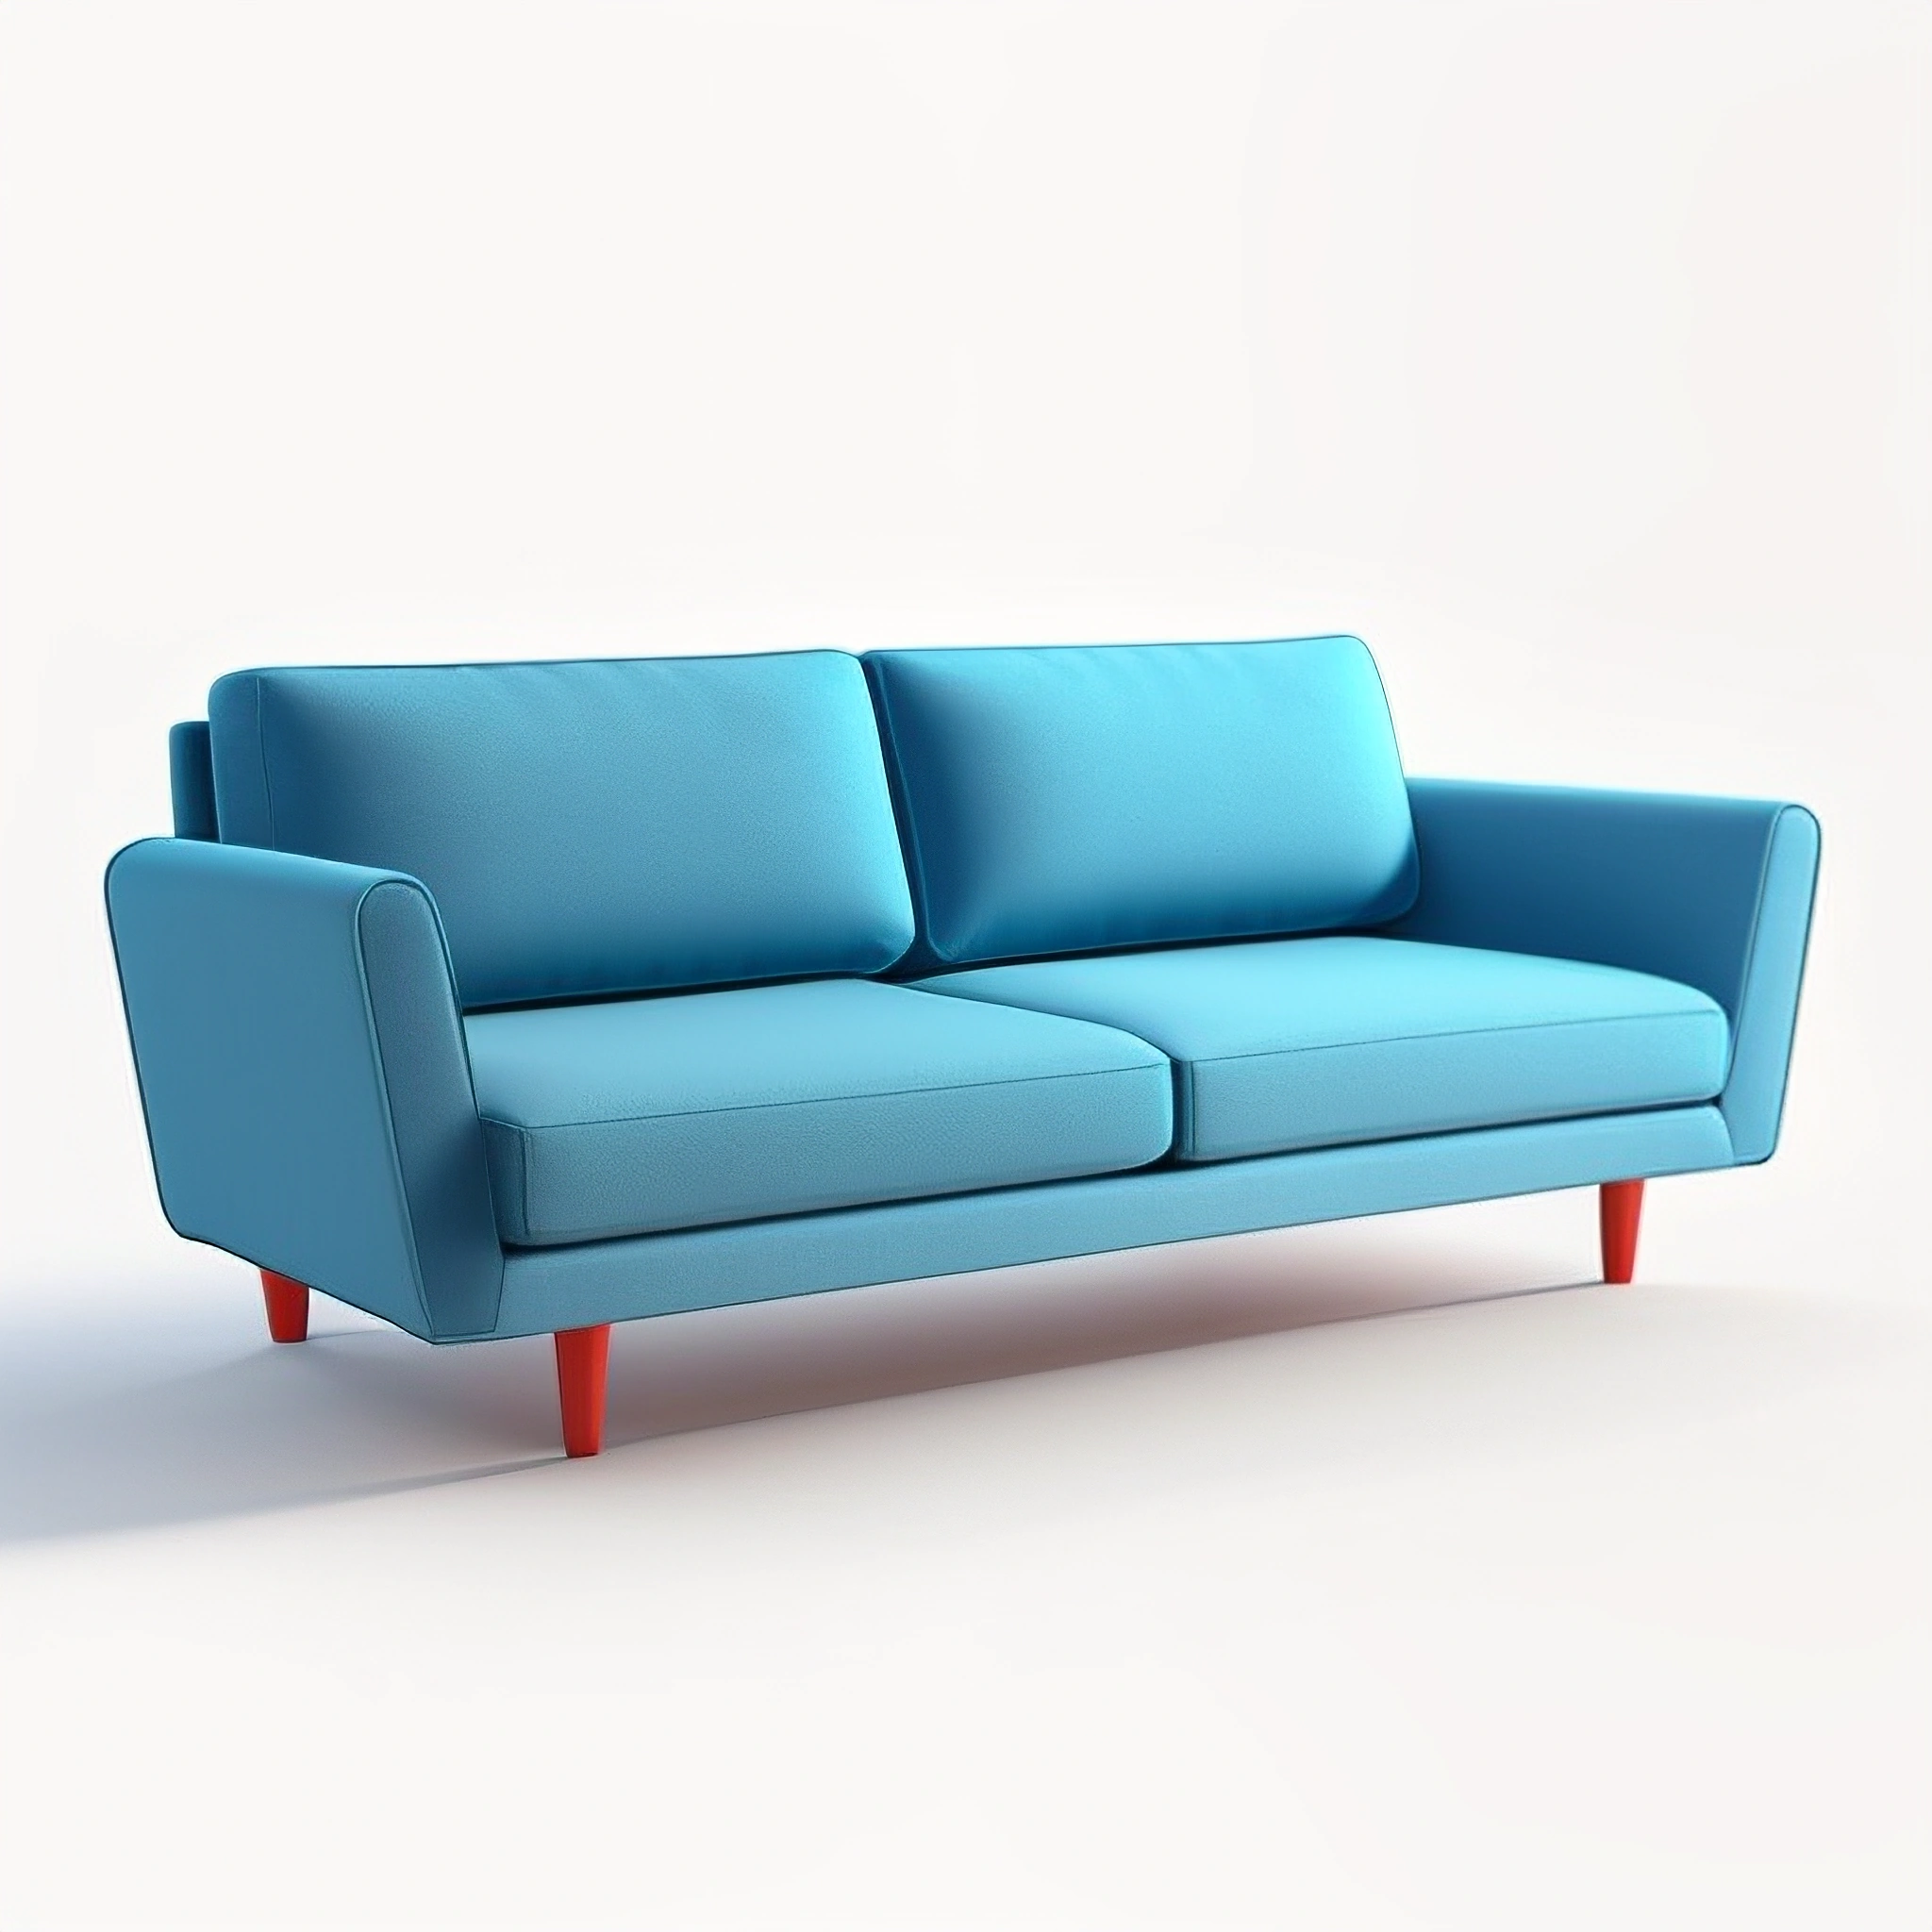 a close up of a blue couch with a red legs